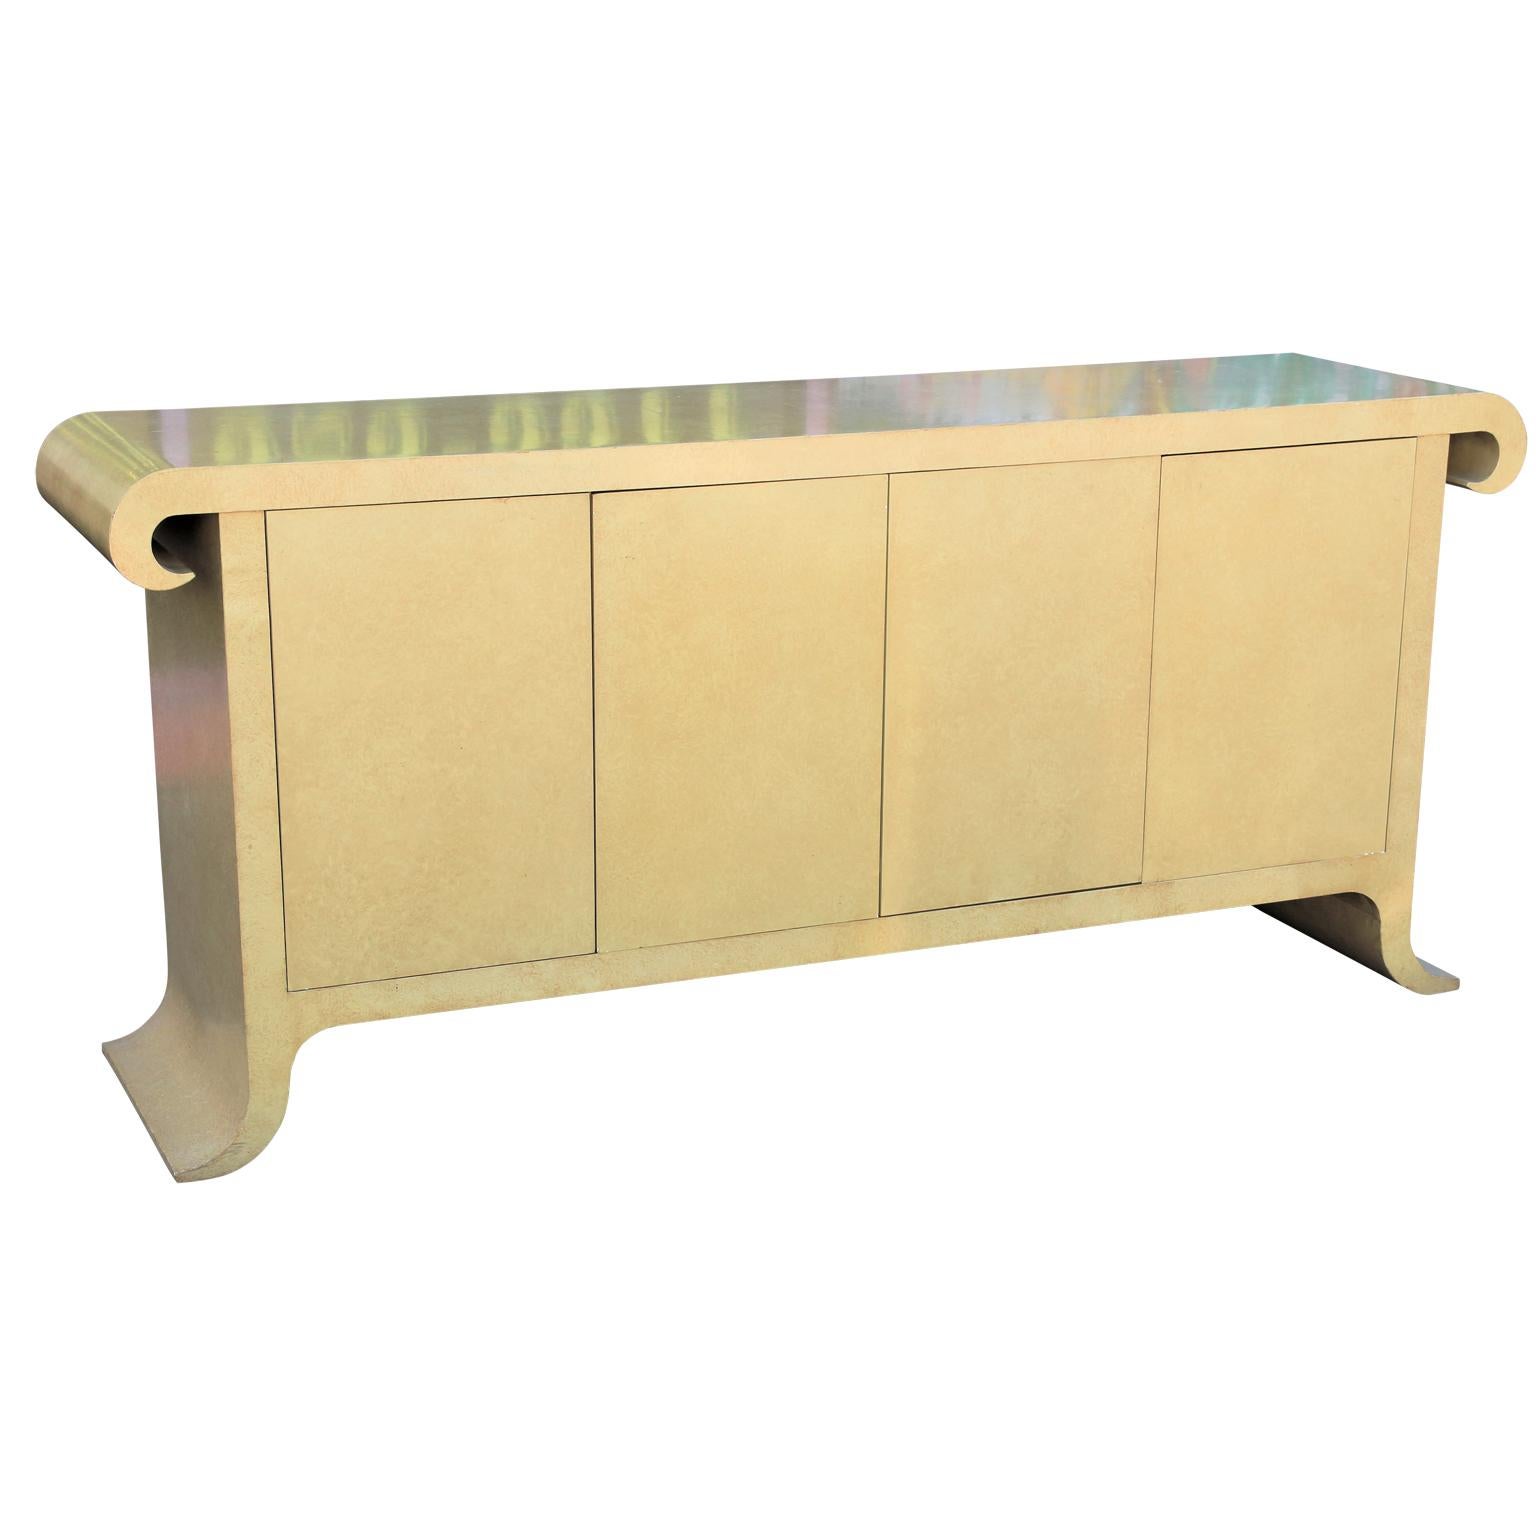 Modern cream colored scroll top sideboard or credenza designed by Alessandro Gambrielli for Baker Furniture in the style of Karl Springer. The case features two pull out drawers on the left and an adjustable shelf on the right.